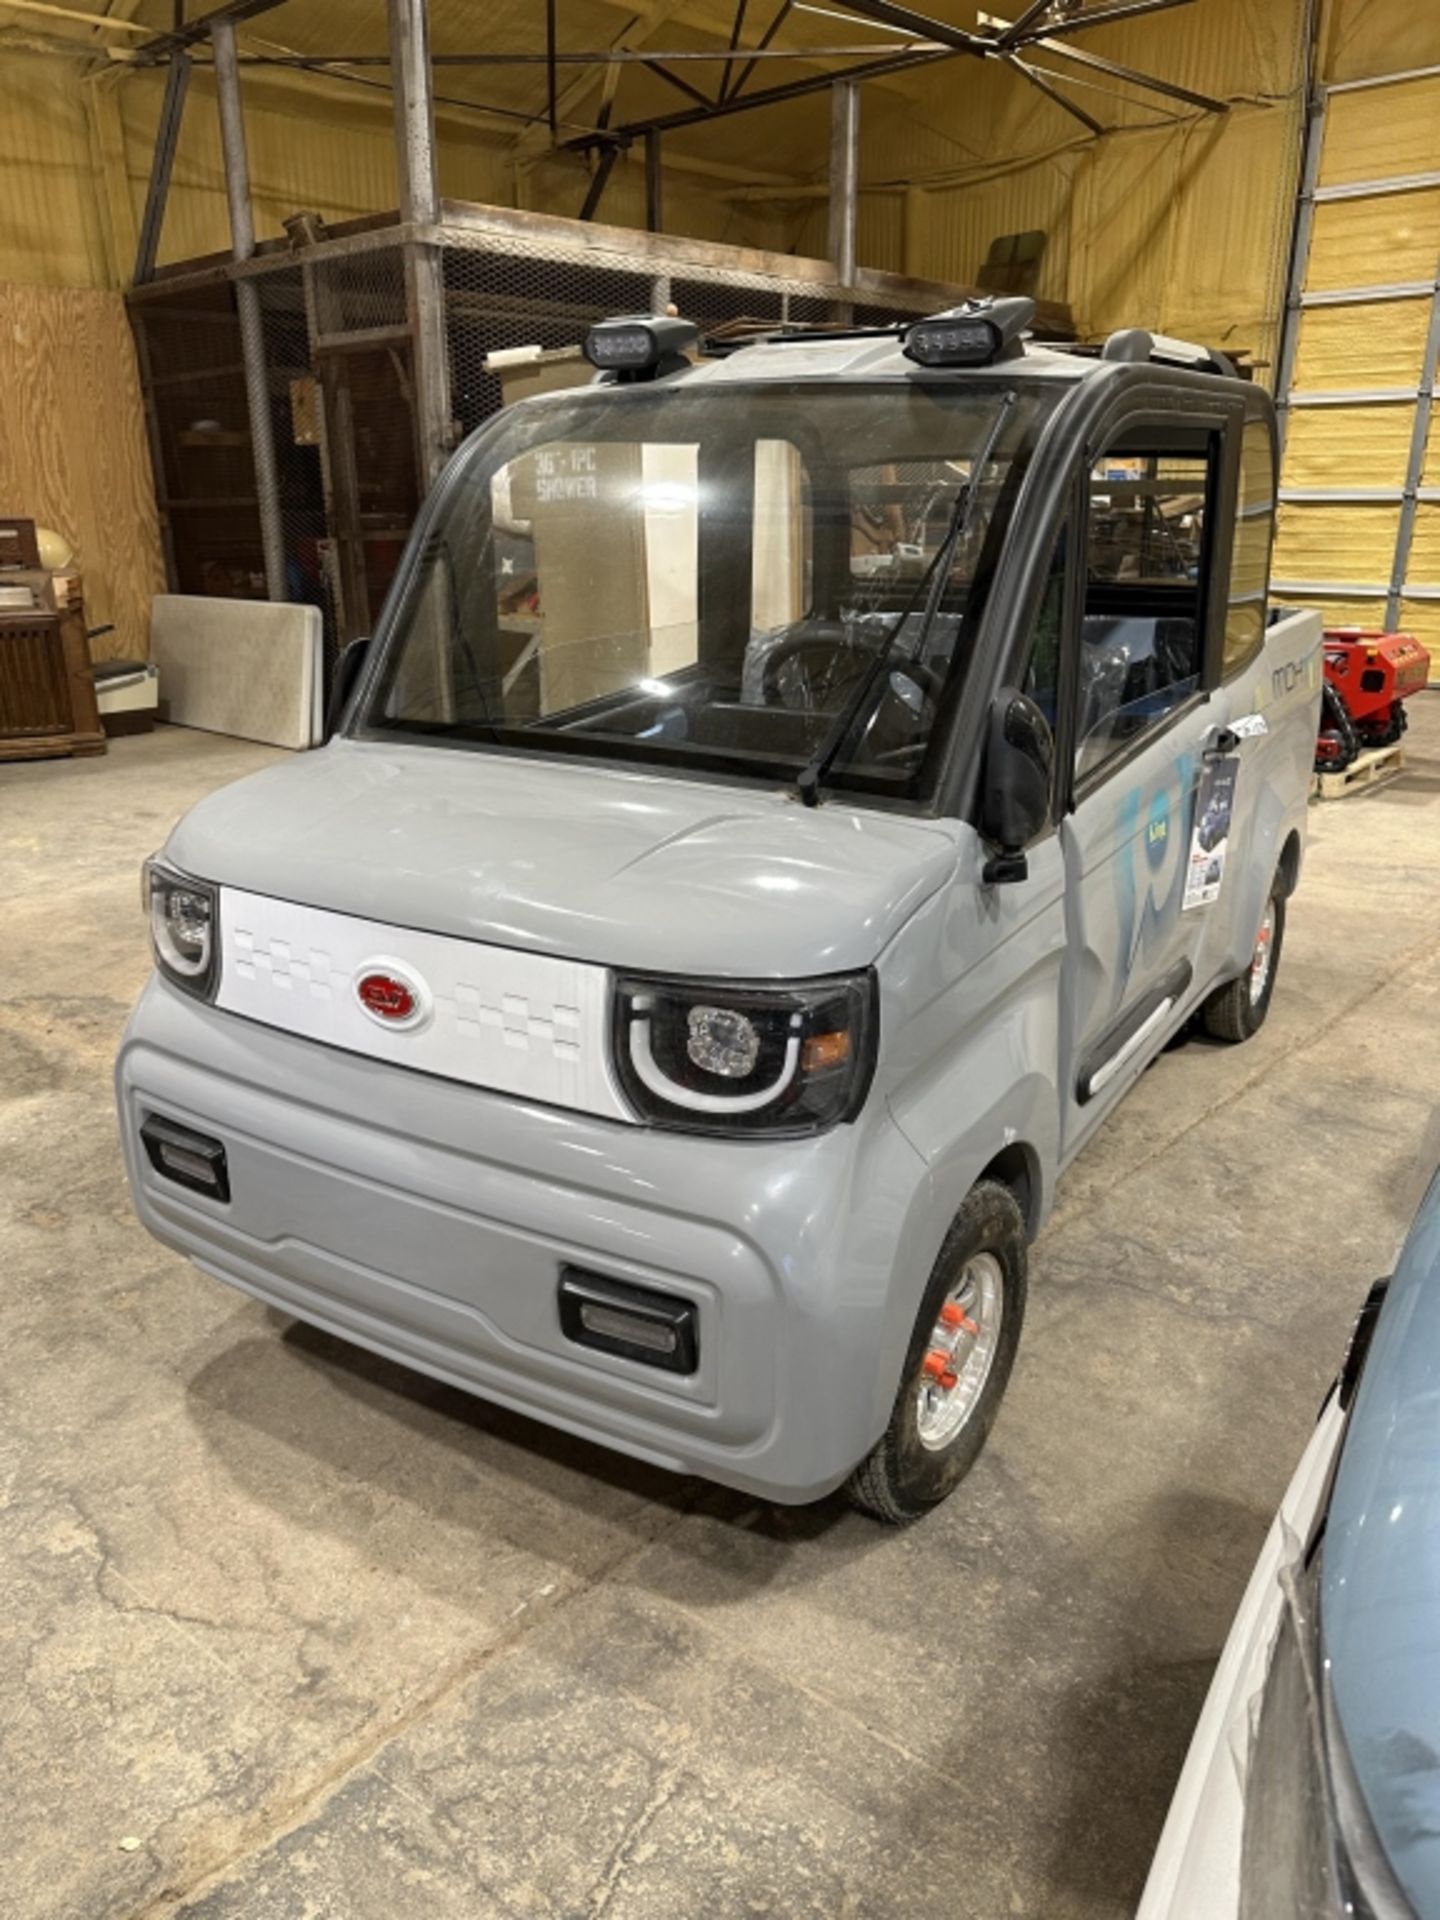 MECO 60 volt Electric Vehicle - Image 8 of 25